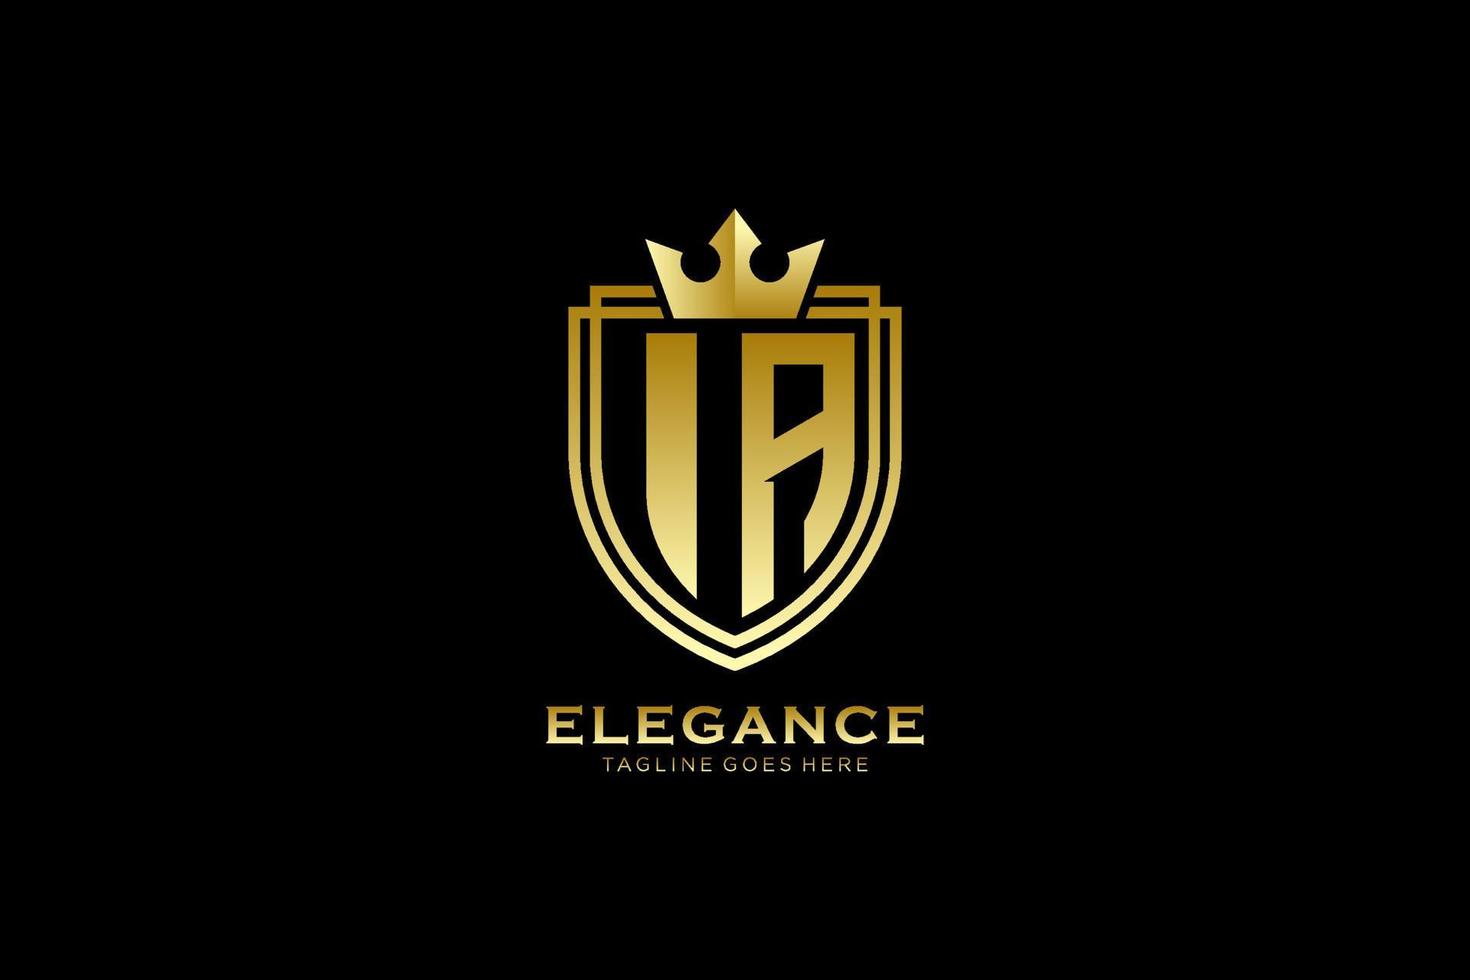 initial IA elegant luxury monogram logo or badge template with scrolls and royal crown - perfect for luxurious branding projects vector